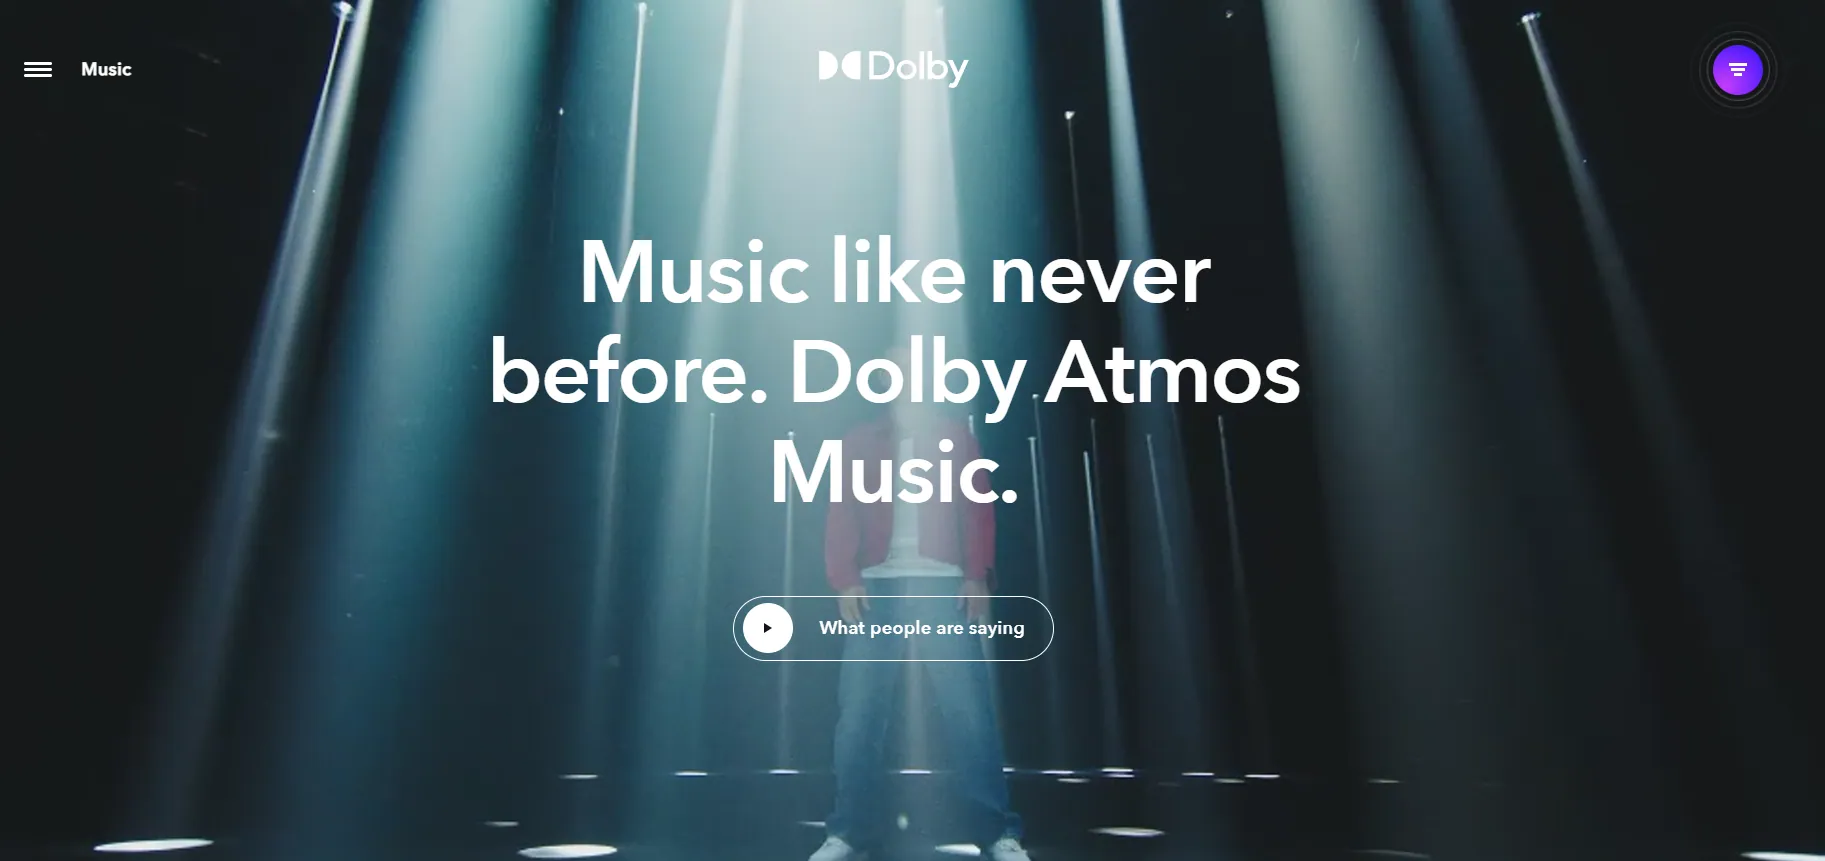 The following image shows a screenshot of a Dolby Atmos video landing page.